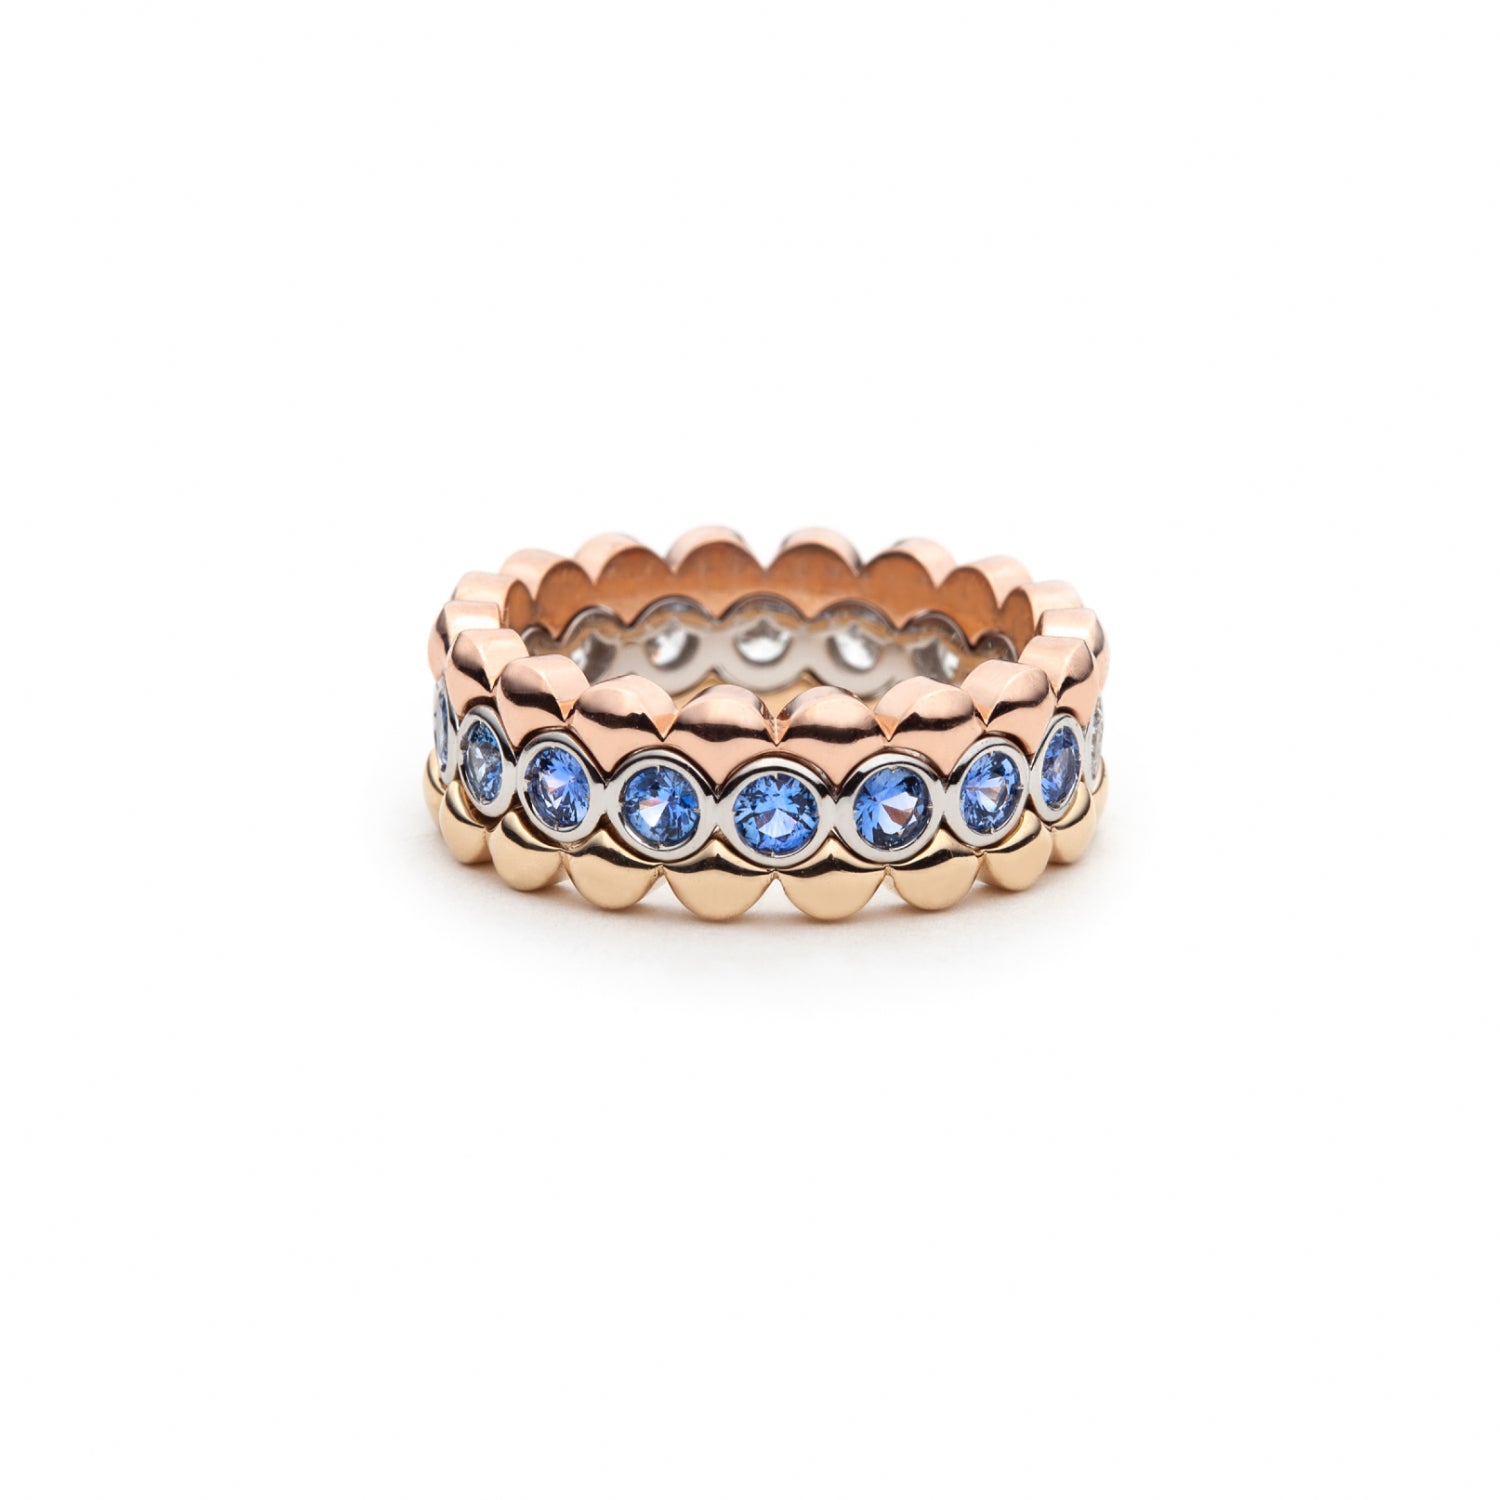 Mermaid Diamond and Sapphire Eternity Ring Stacked with Other Designs